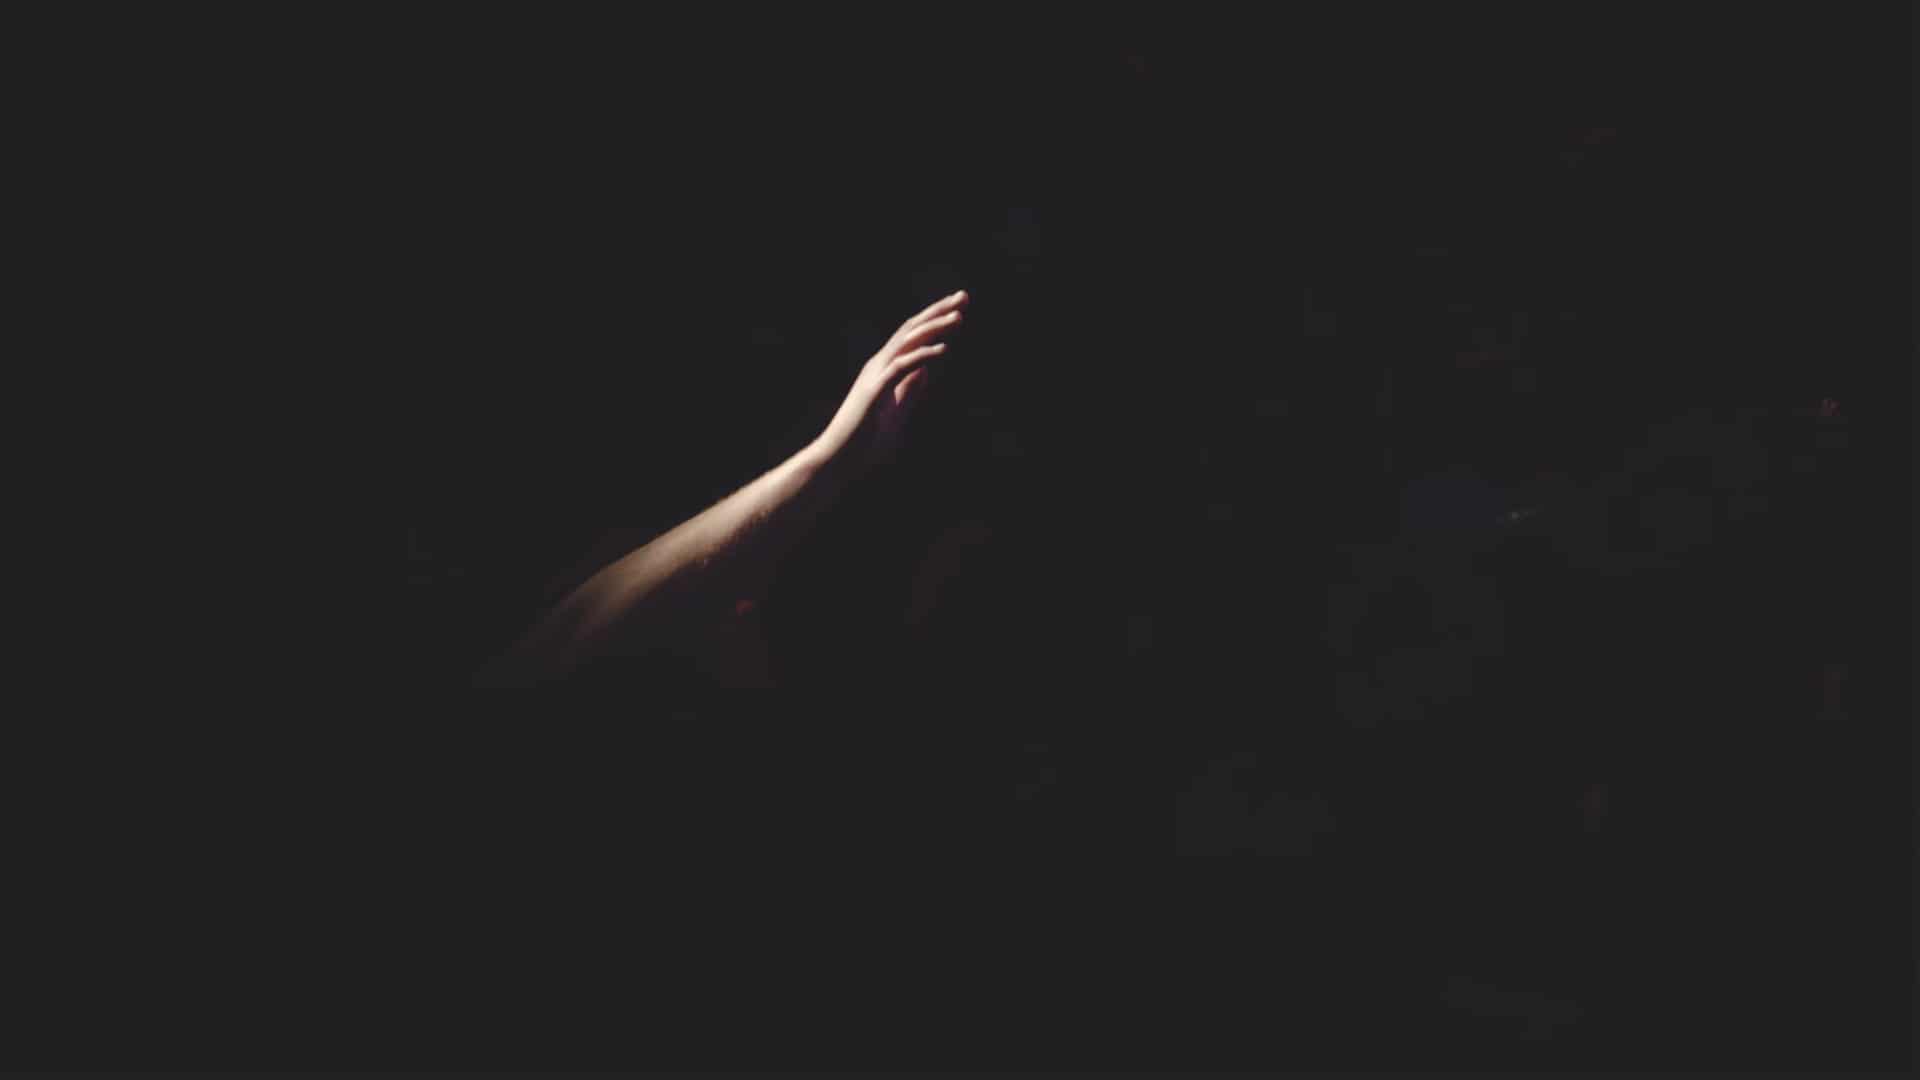 Lit hand in the darkness